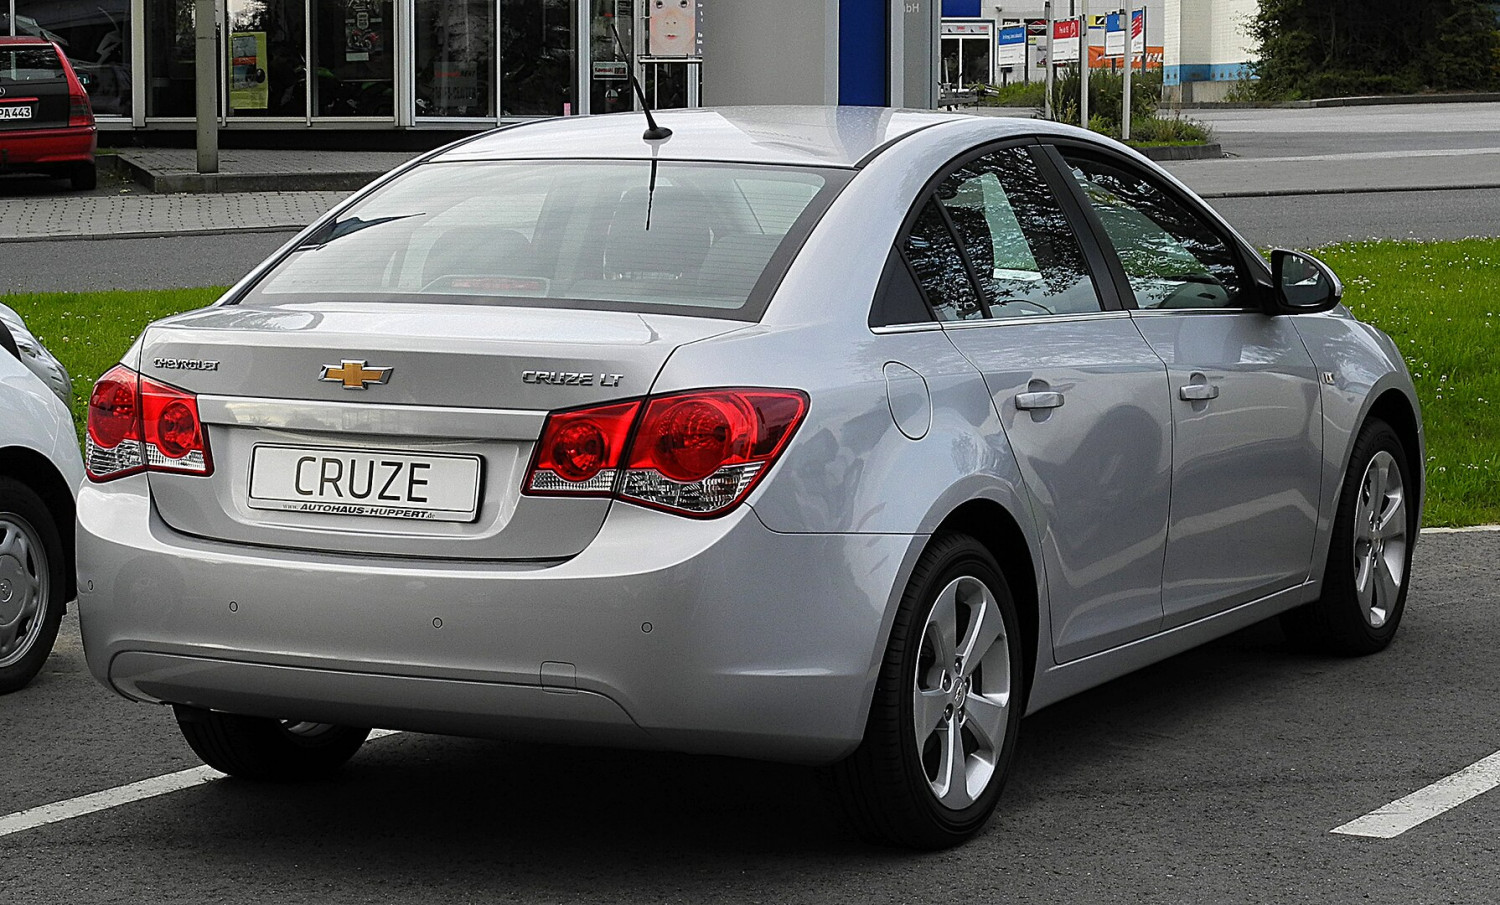 Example of a Cruze 1